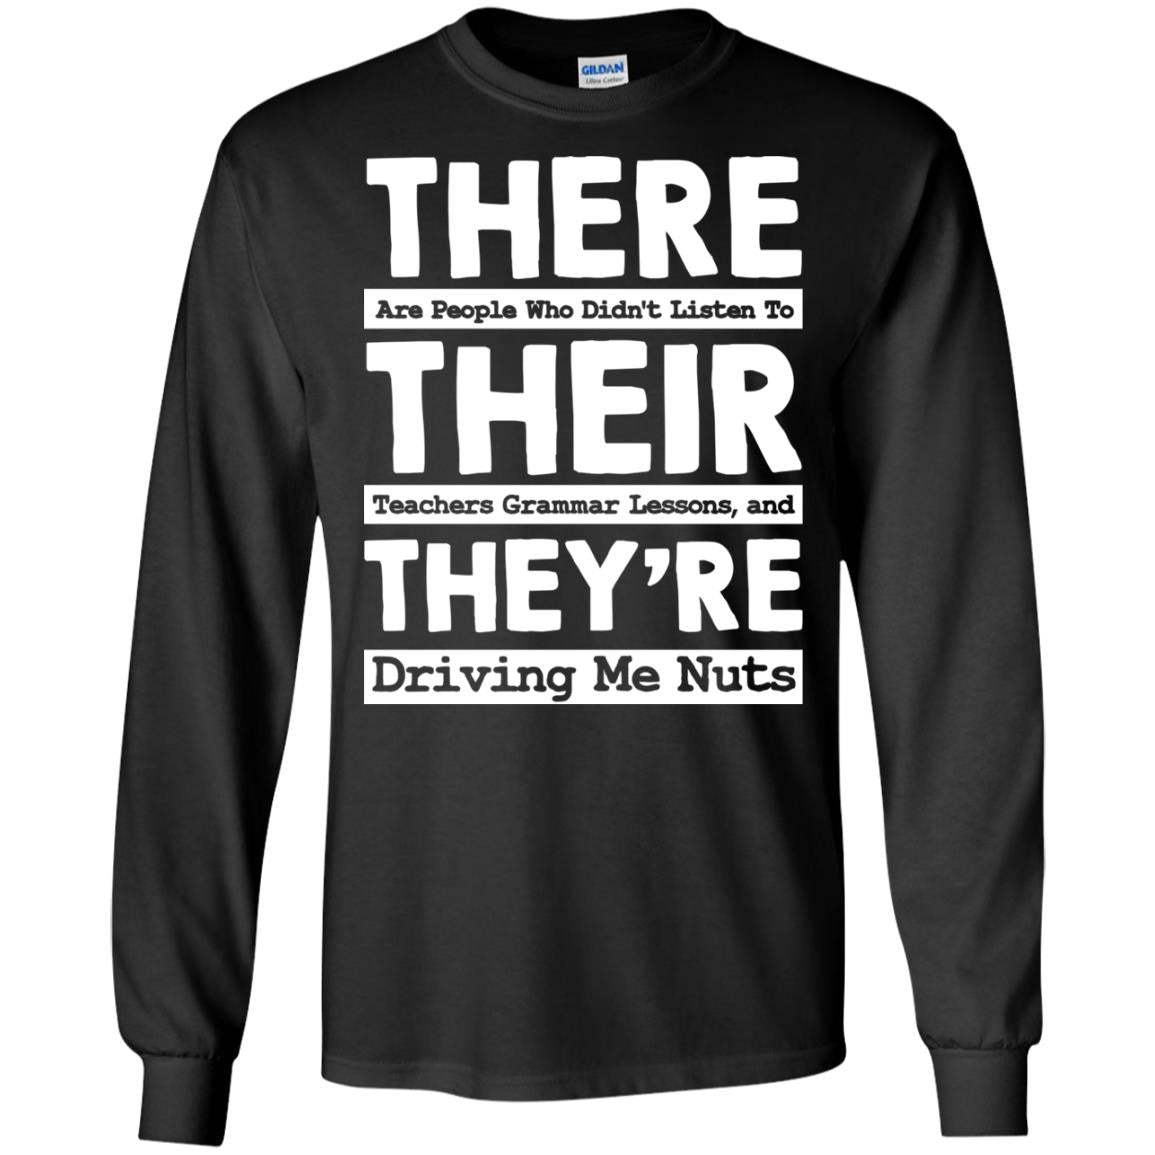 There Are People Who Didn't Listen To Their Teachers Grammar Lessons, And They're Driving Me Nuts TshirtG240 Gildan LS Ultra Cotton T-Shirt